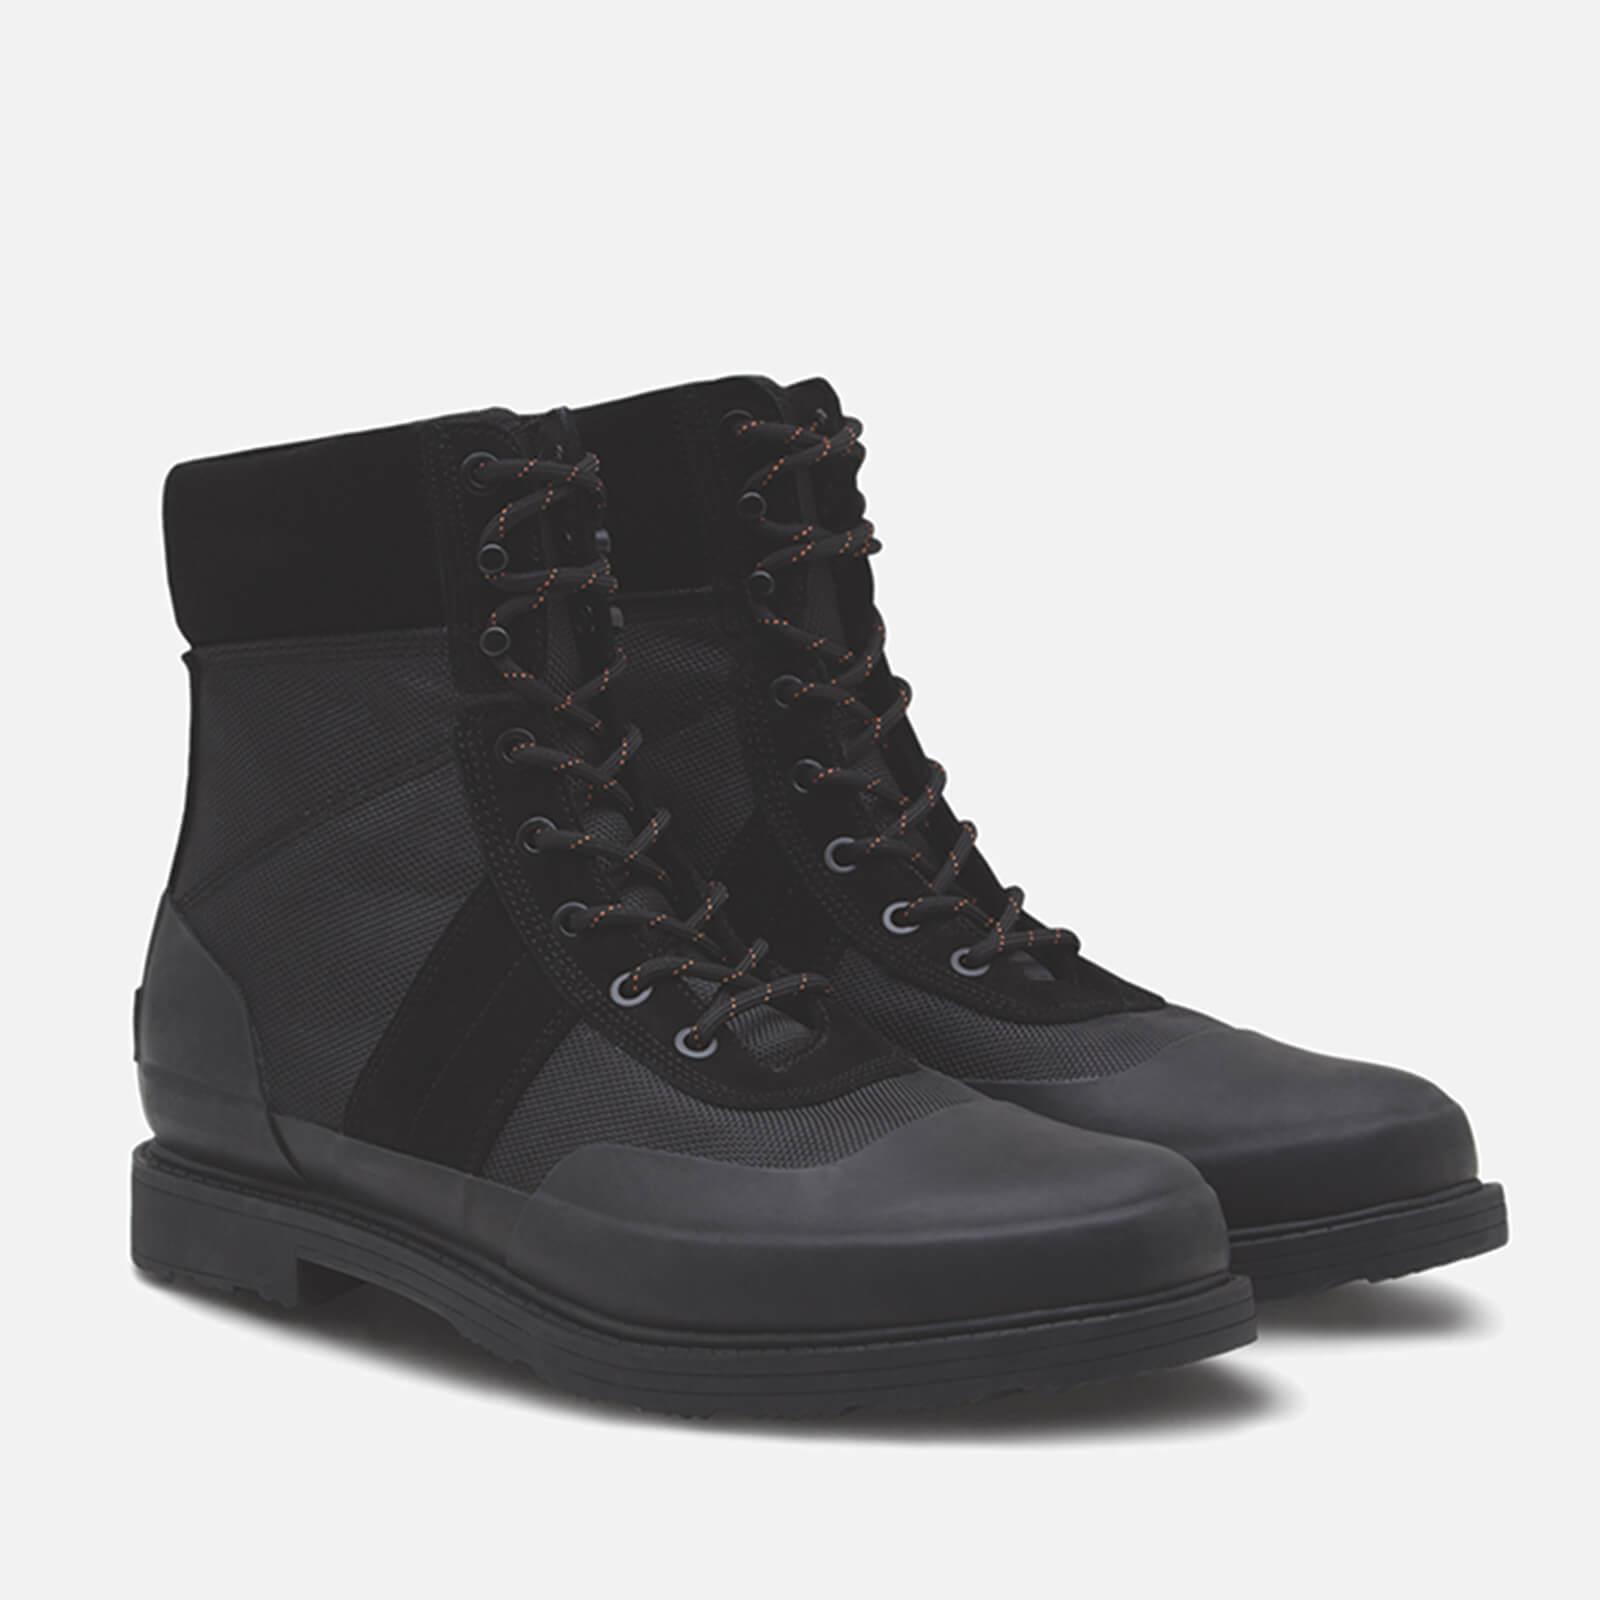 HUNTER Synthetic Original Insulated Commando Boots in Black for Men - Lyst